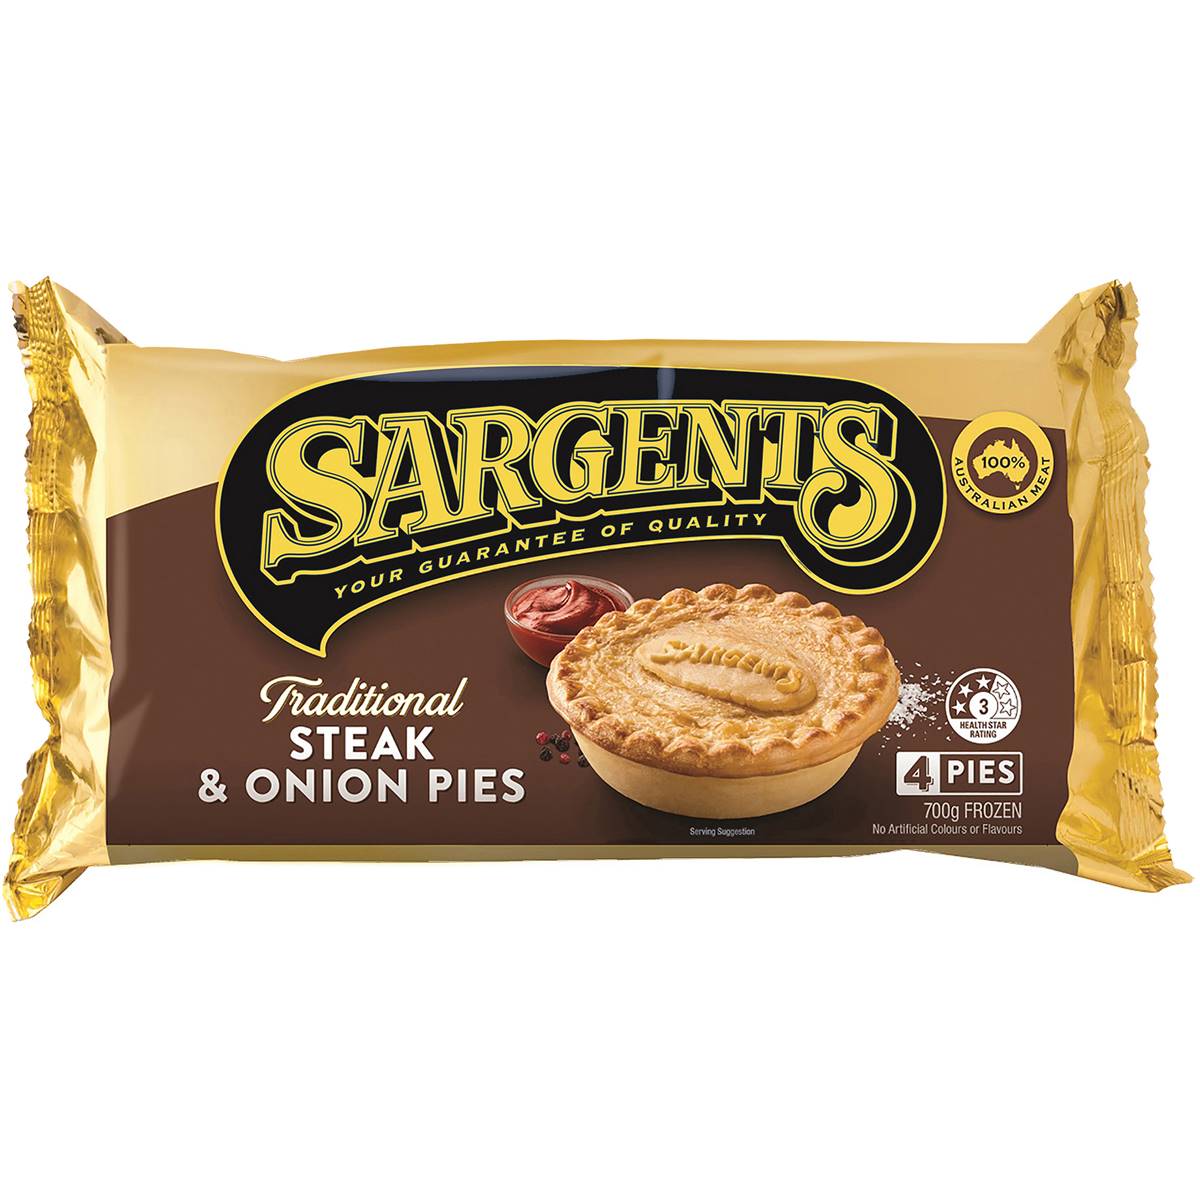 Calories in Sargents Traditional Pies Steak & Onion